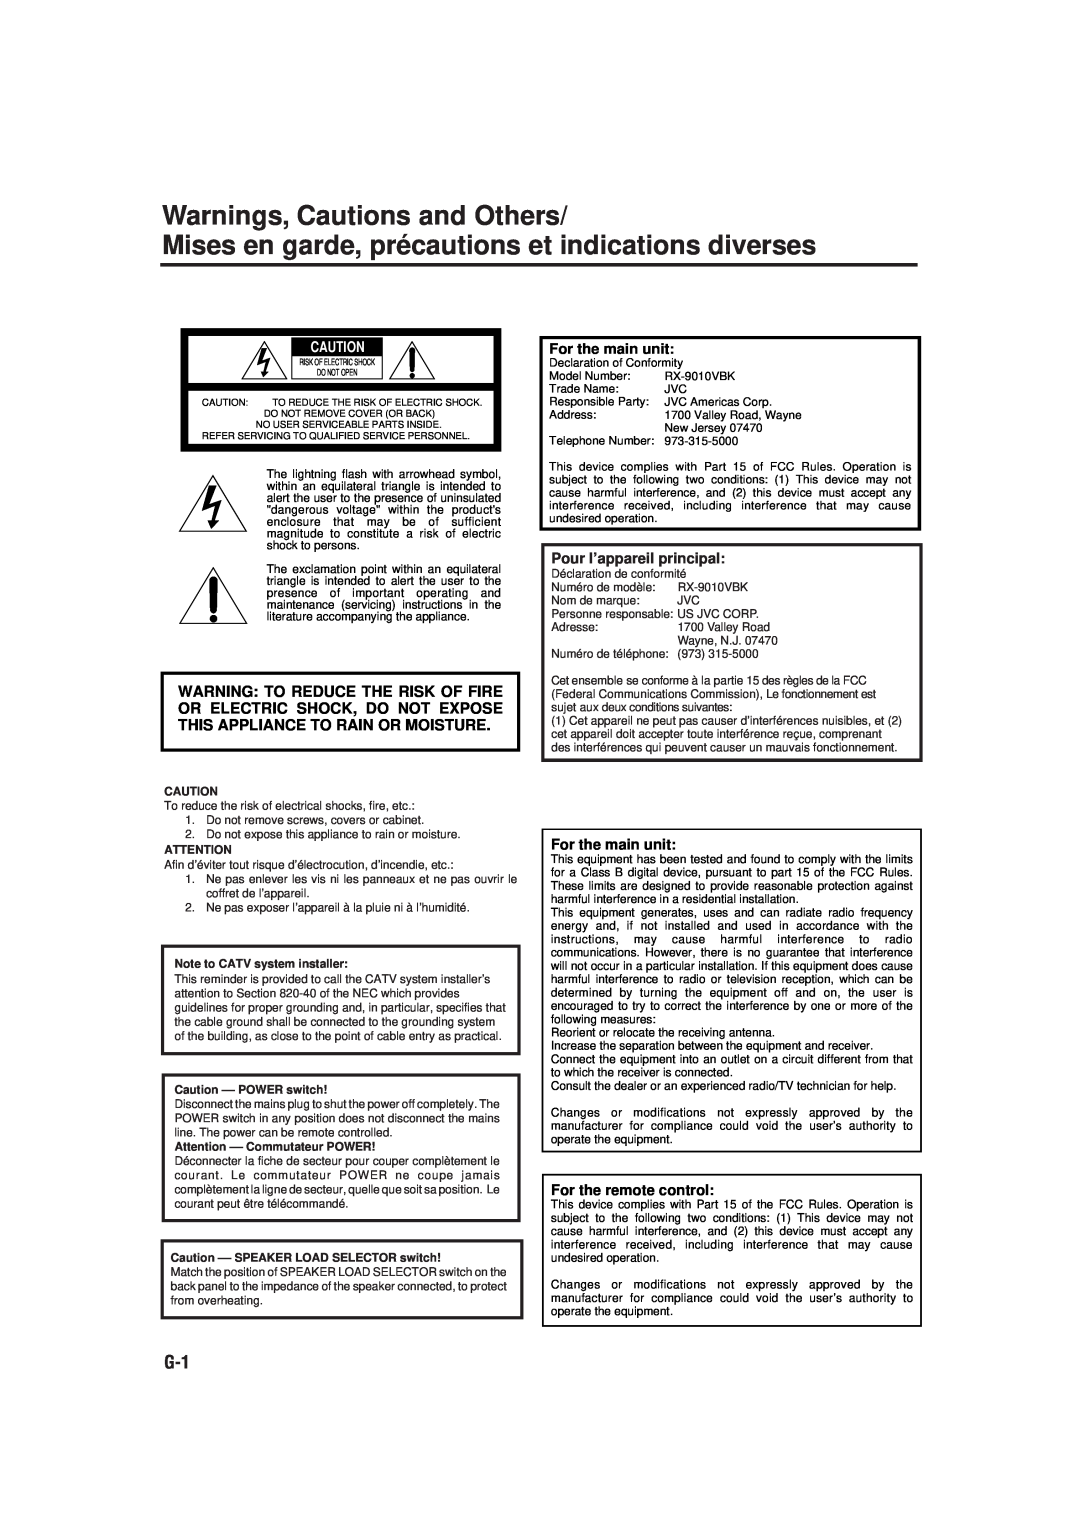 JVC RX-9010VBK manual Warnings, Cautions and Others, For the main unit, Pour l’appareil principal, For the remote control 